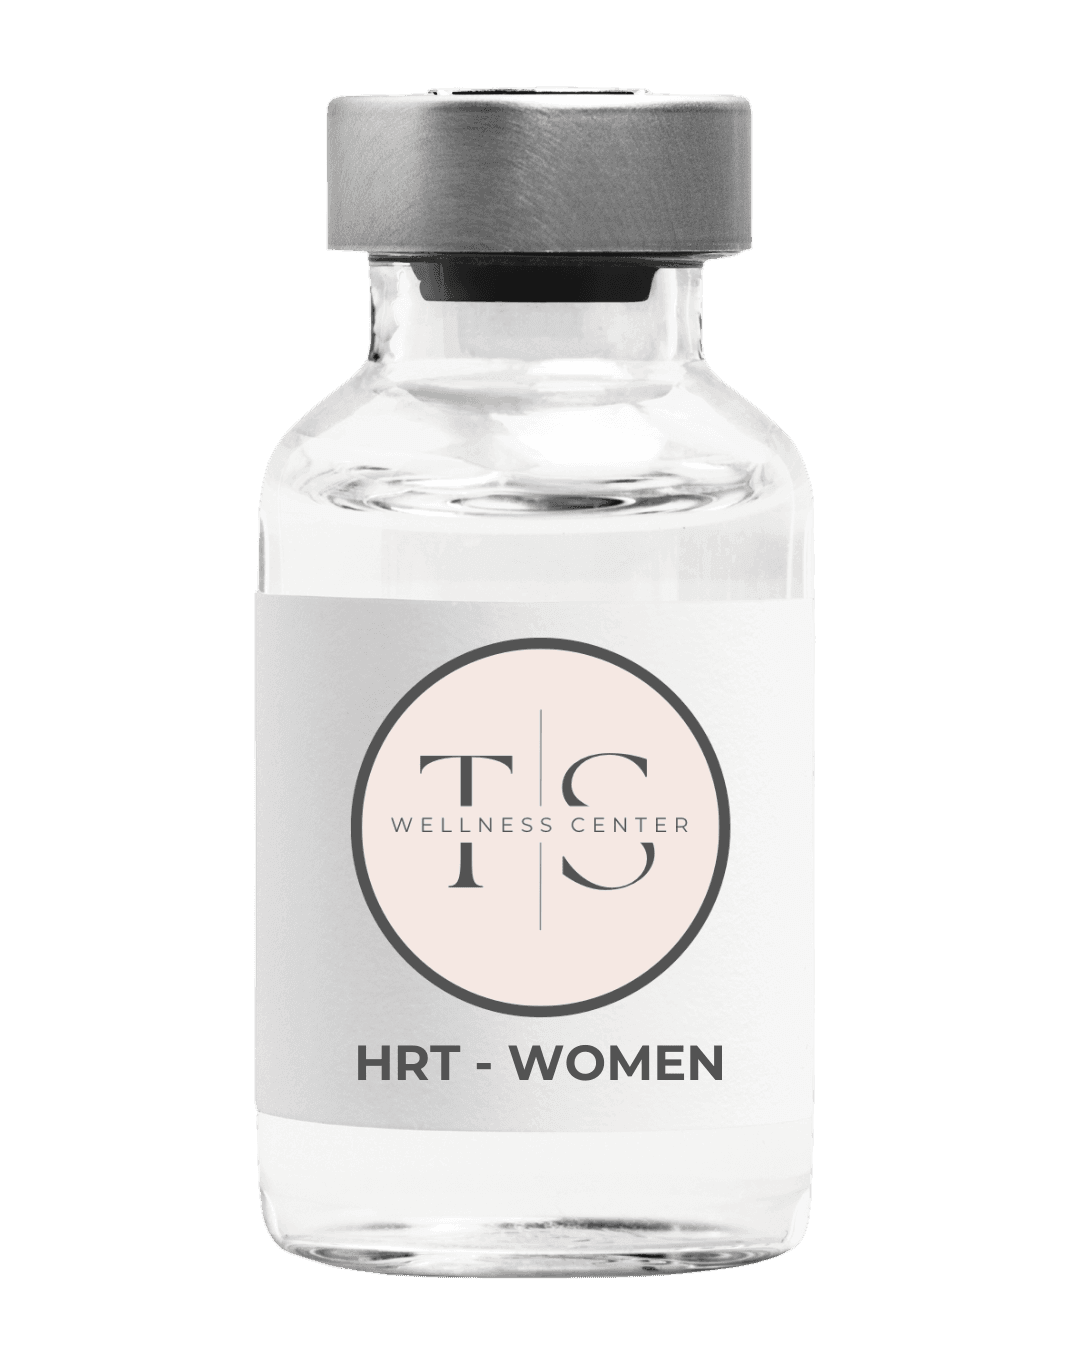 HRT hormone replacement therapy for women